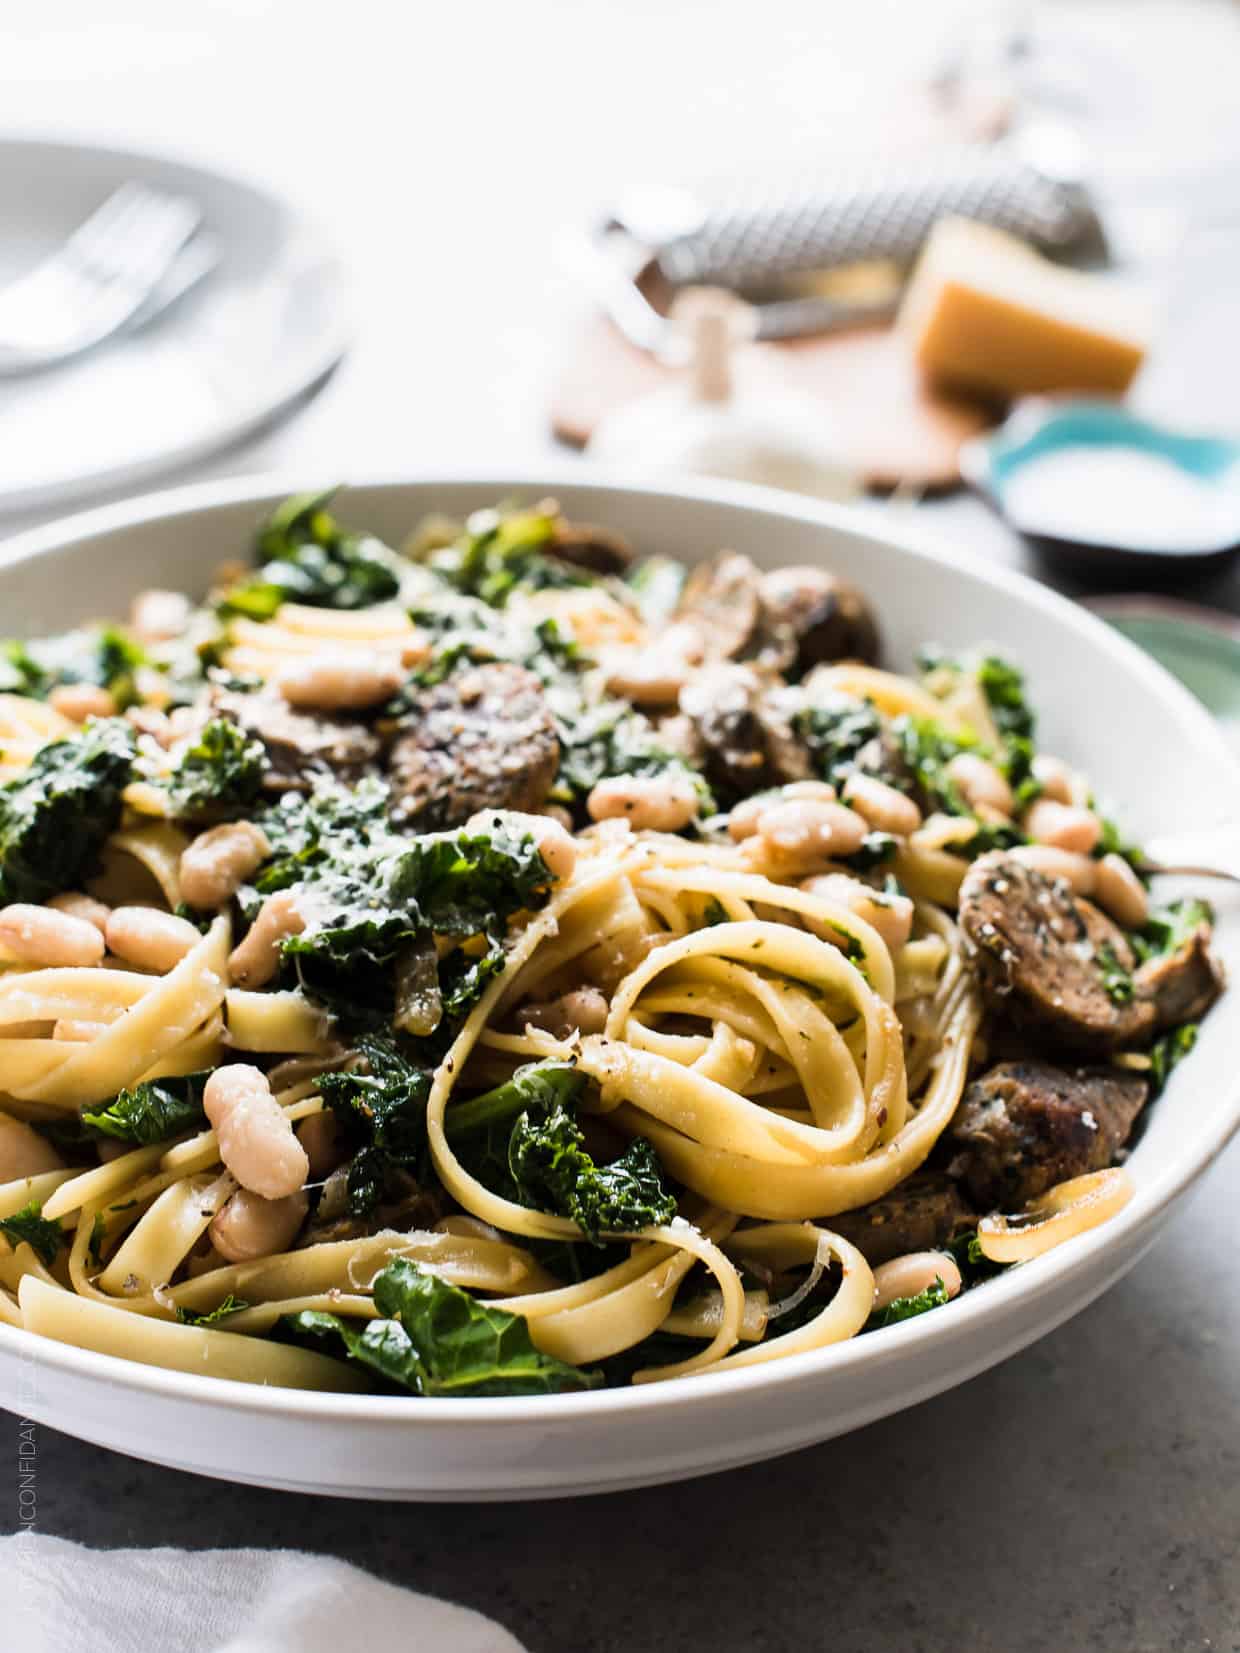 Fettuccine with Chicken Sausage, Kale and Cannellini Beans piled high in a white bowl.